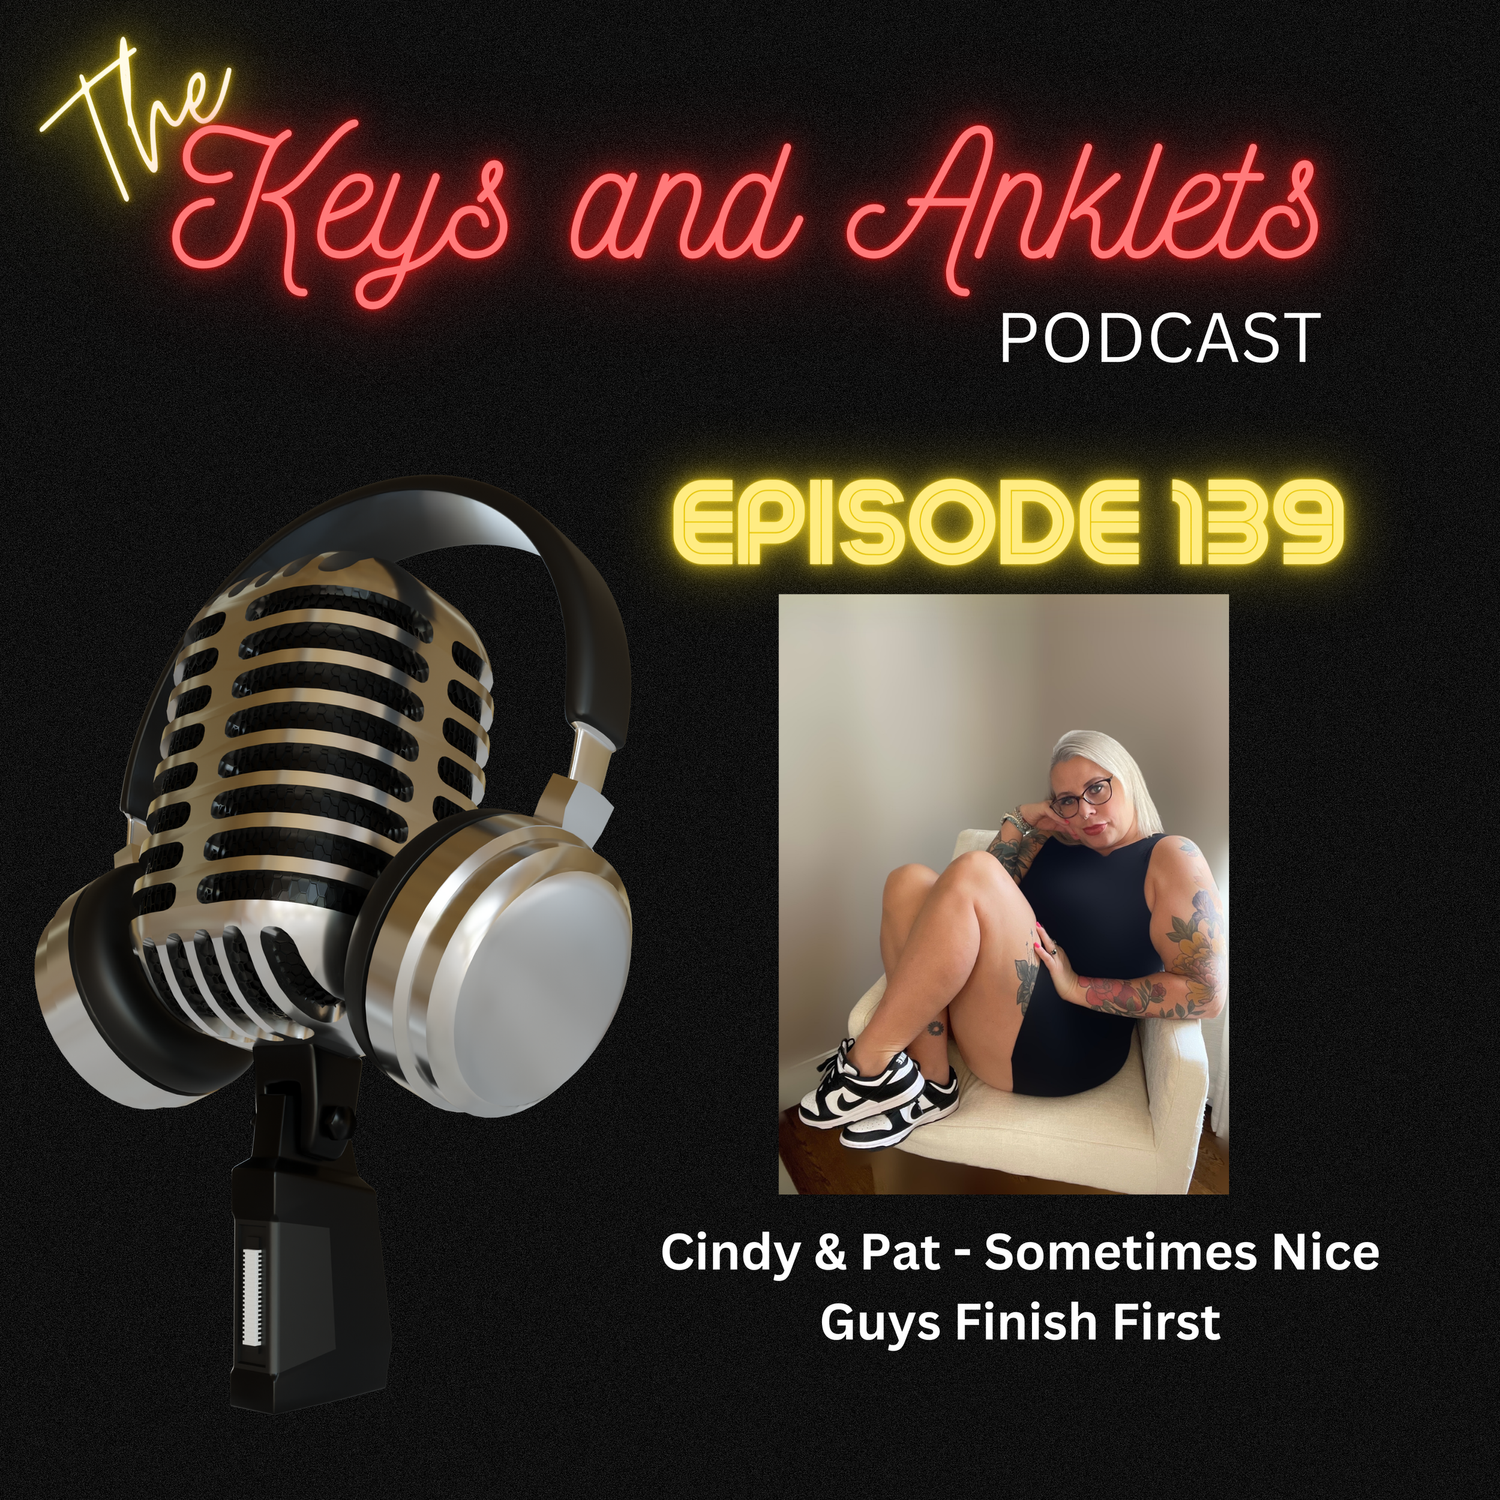 Episode 139 - Cindy and Pat - Sometimes Nice Guys do Finish First